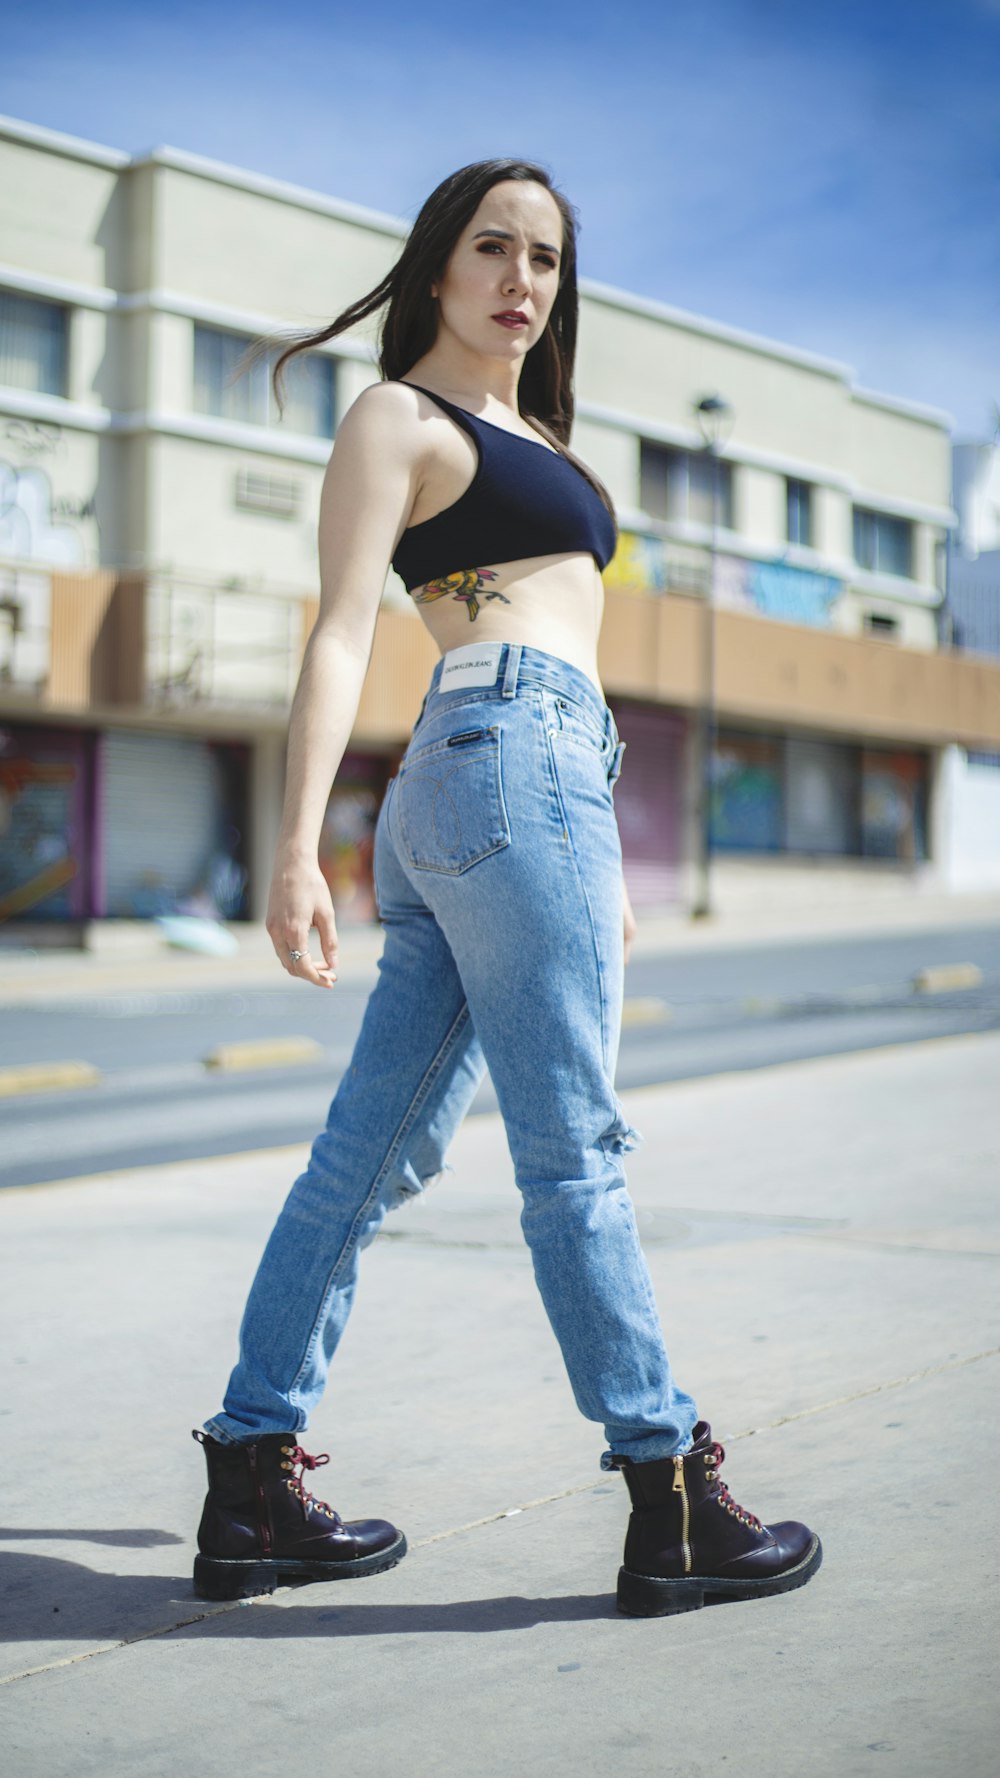 Woman in blue denim jeans and black sports bra standing on road during  daytime photo – Free Chihuahua Image on Unsplash